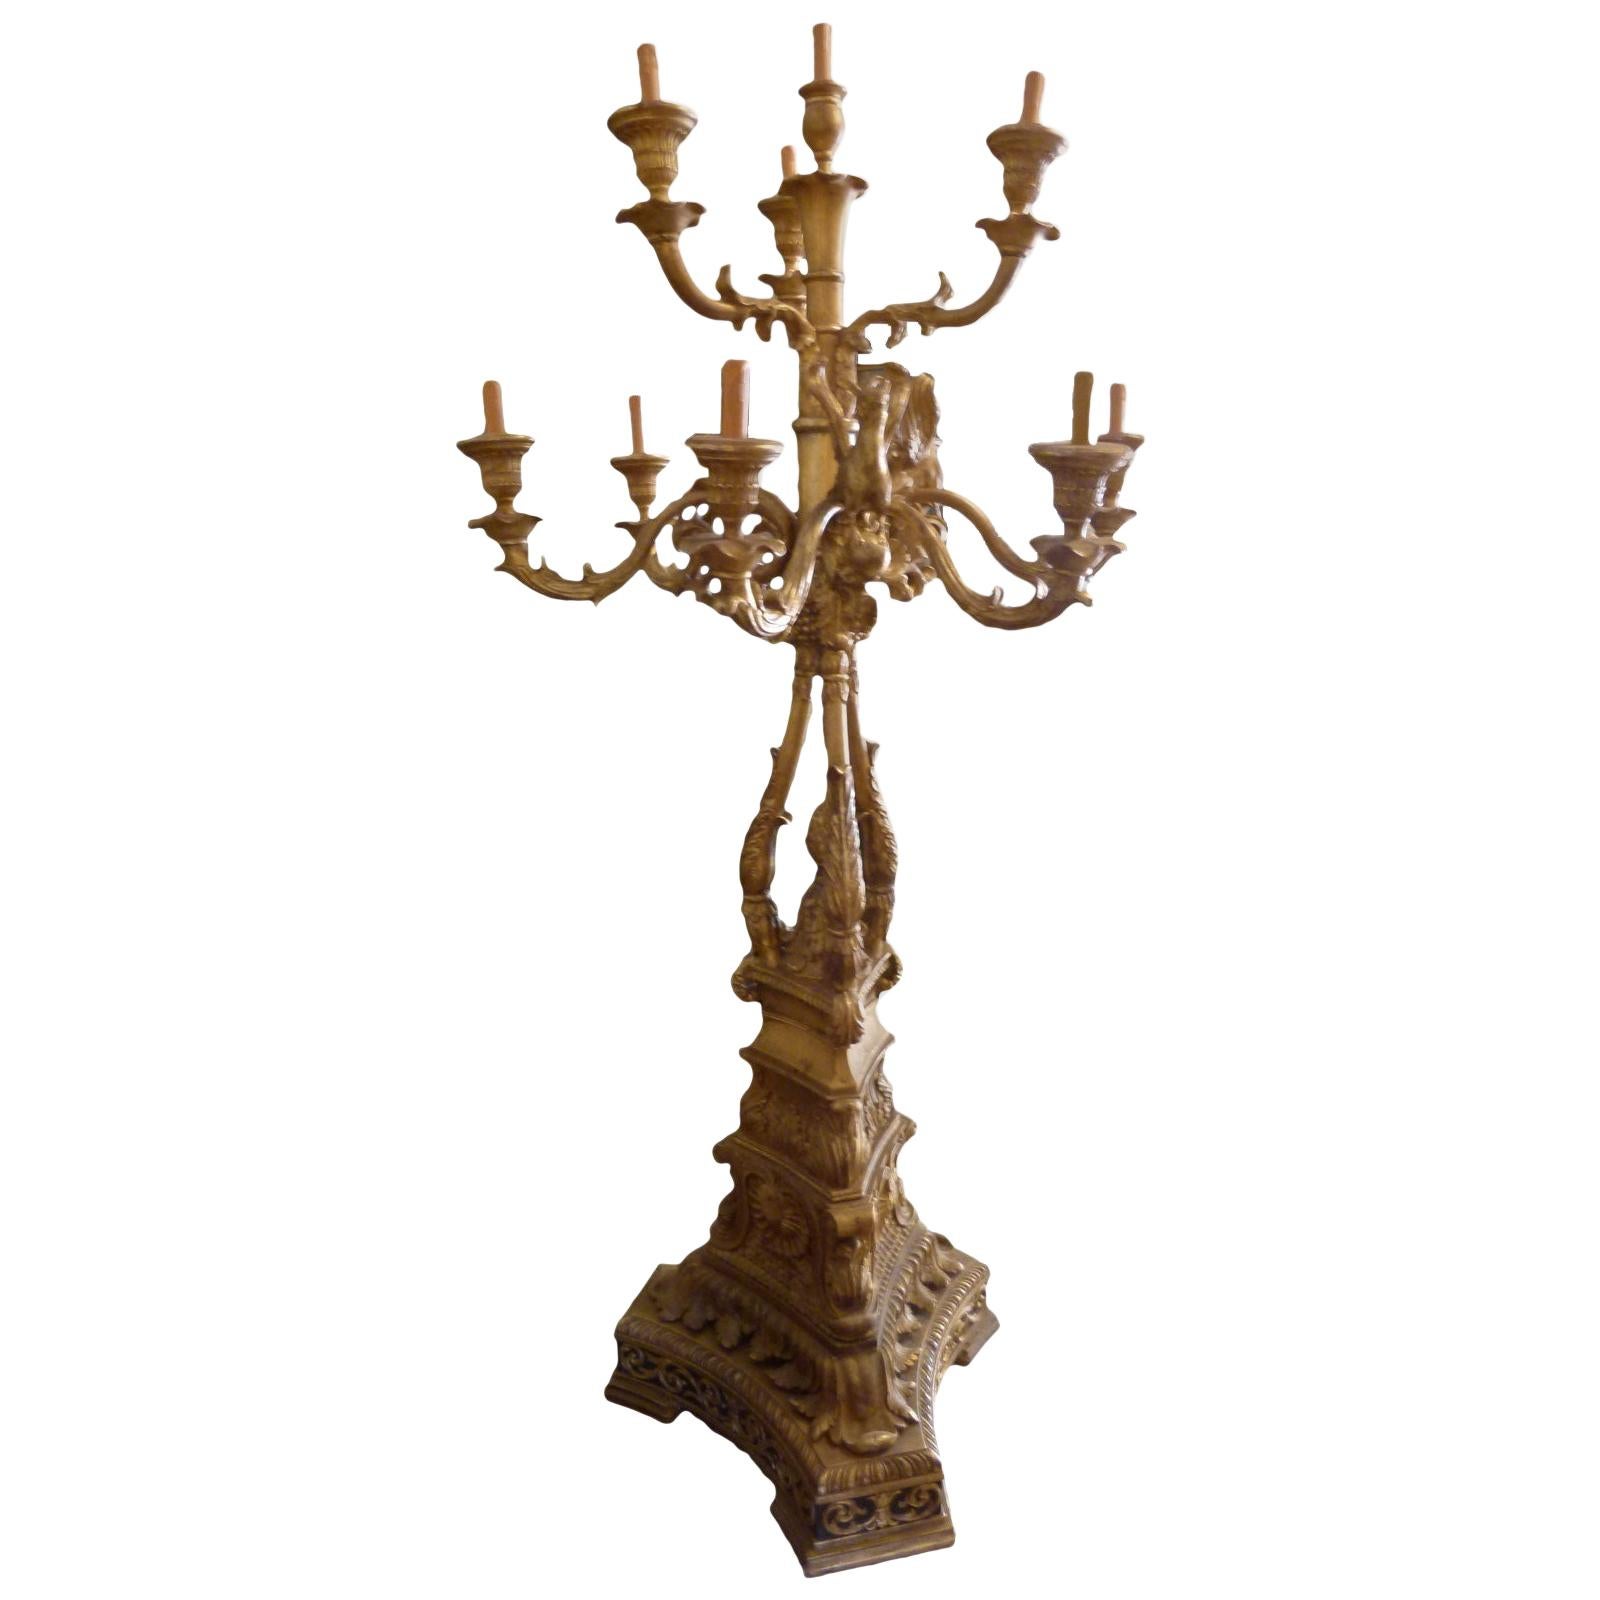 Tall standing candelabra. Gold patinated. Hand carved wood. Square base with 10 arms in two different levels.